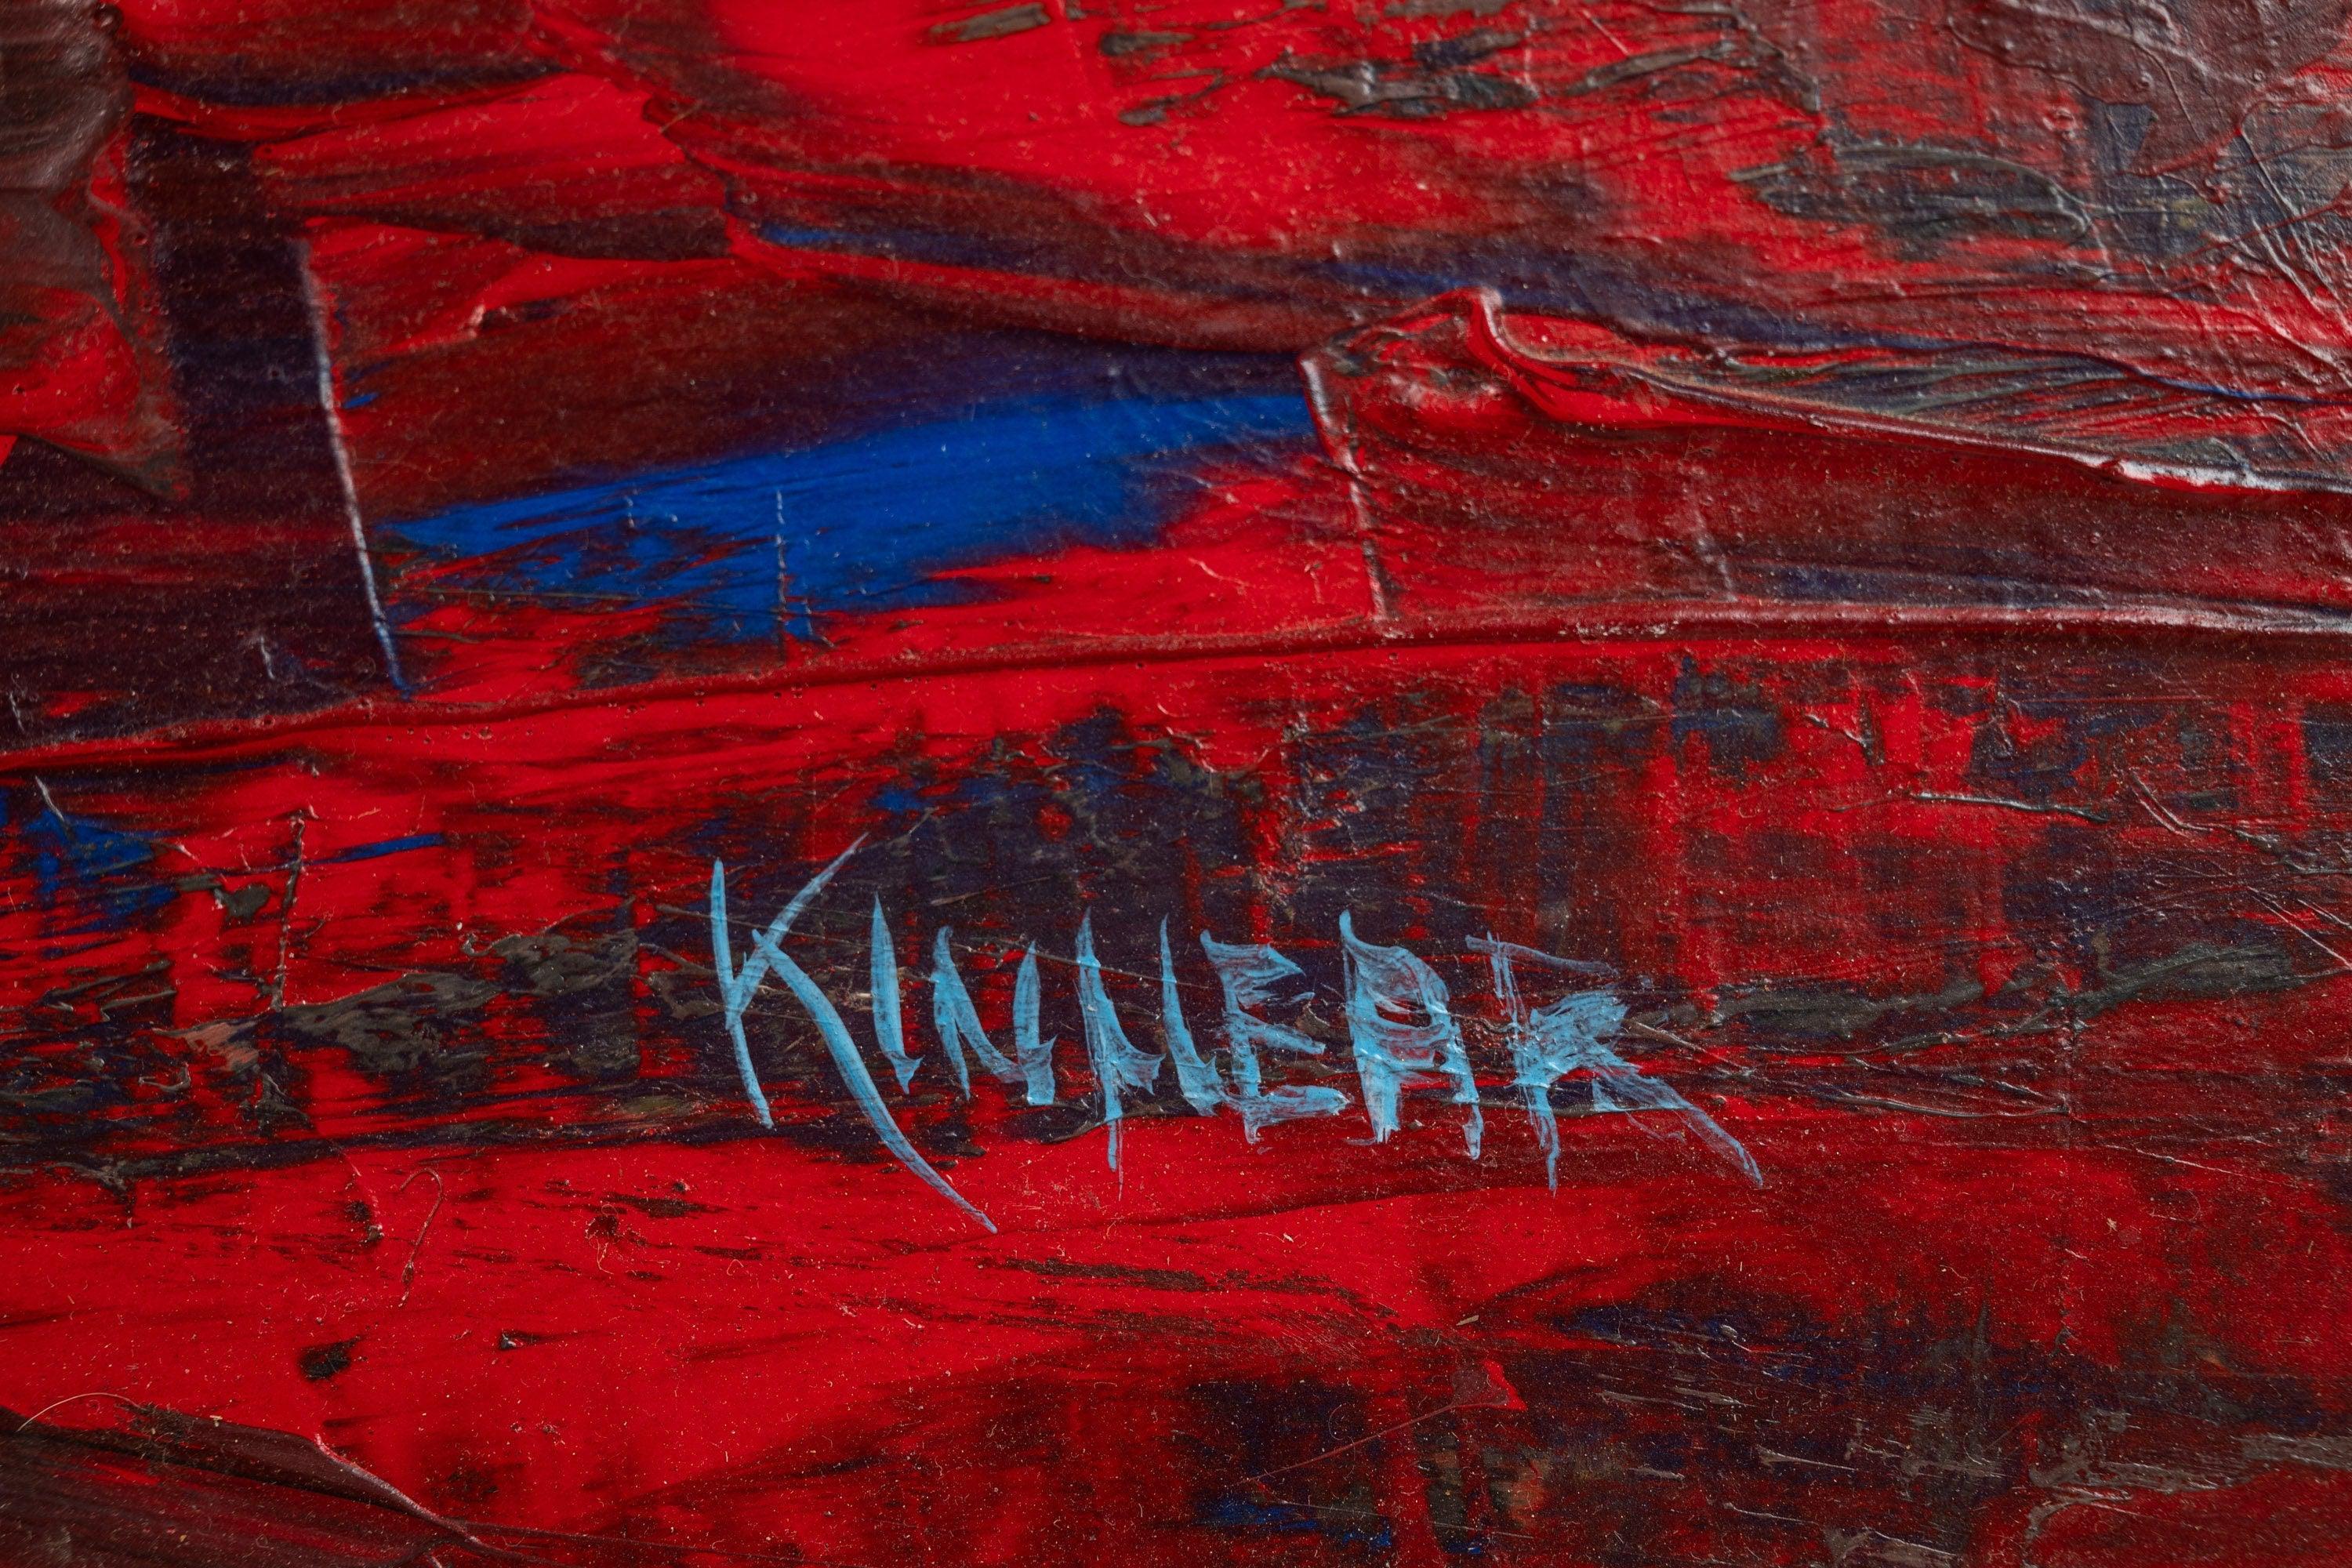 Canadian Signed Abstract Expressionist Oil Painting by John Kinnear, Canada, c. 1970 For Sale